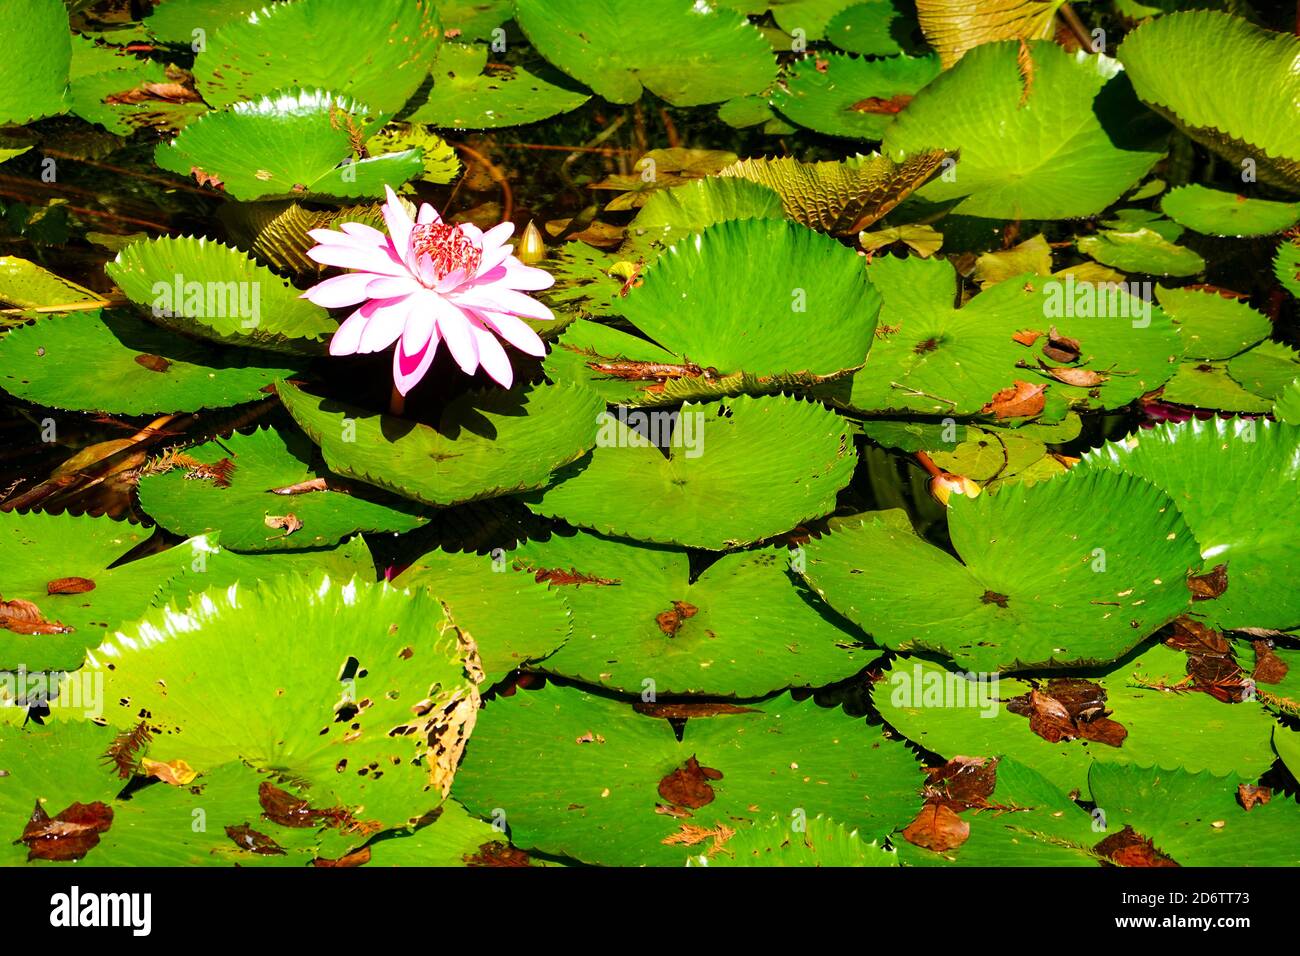 Single purple lily flower, Nymphaea, in a pond, surrounded by lily pads. Florida, USA. Stock Photo